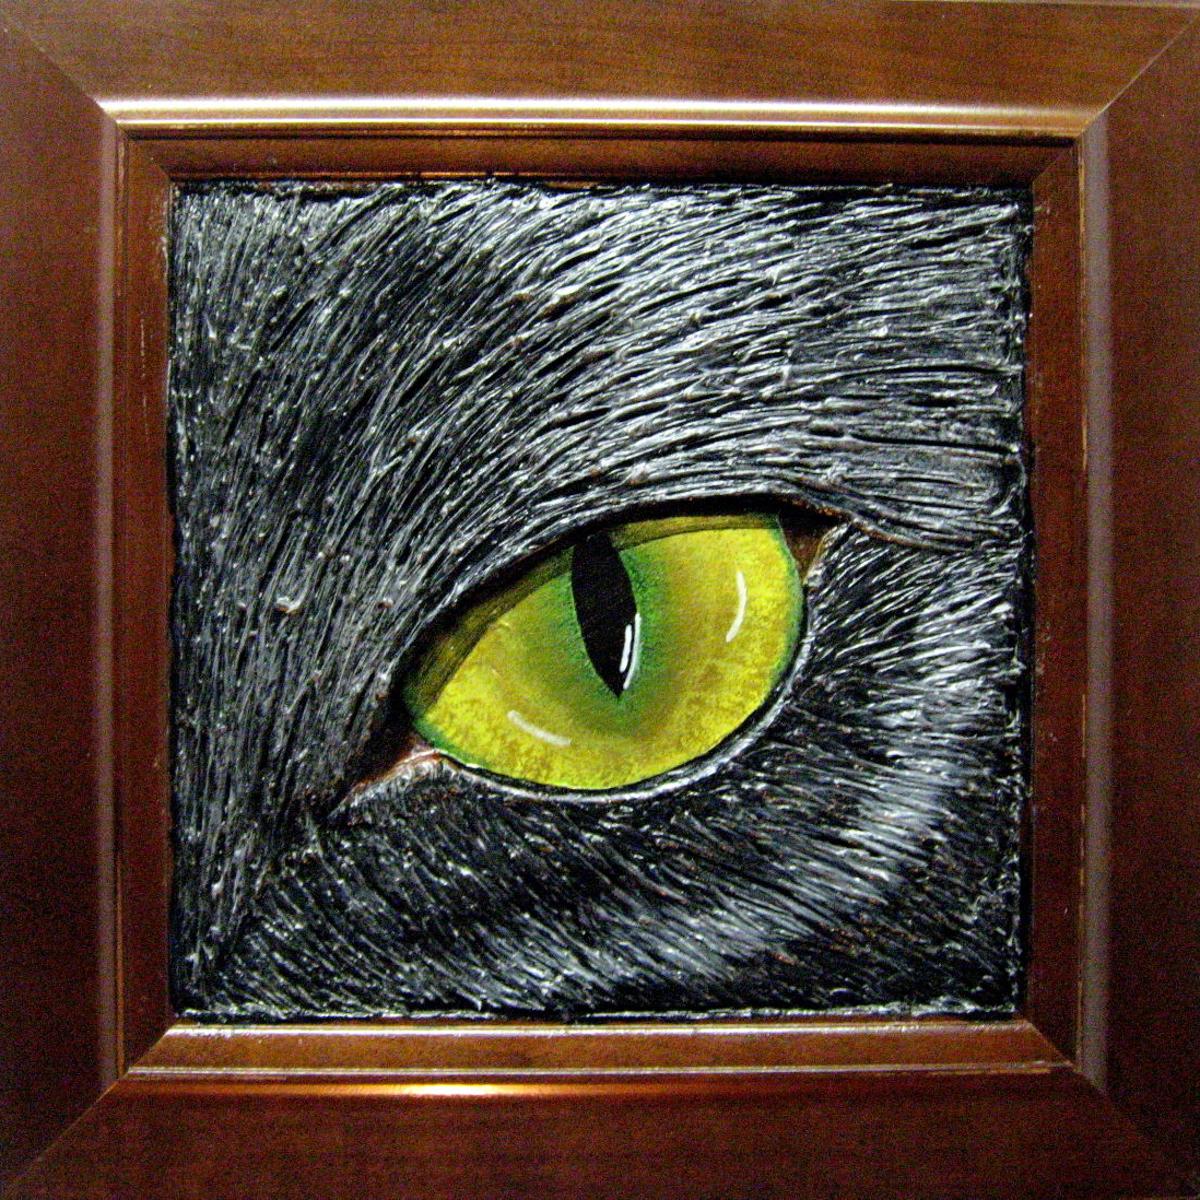 ArtTalk: Local artist produces textured paintings, most recently of animal  eyes | Local 